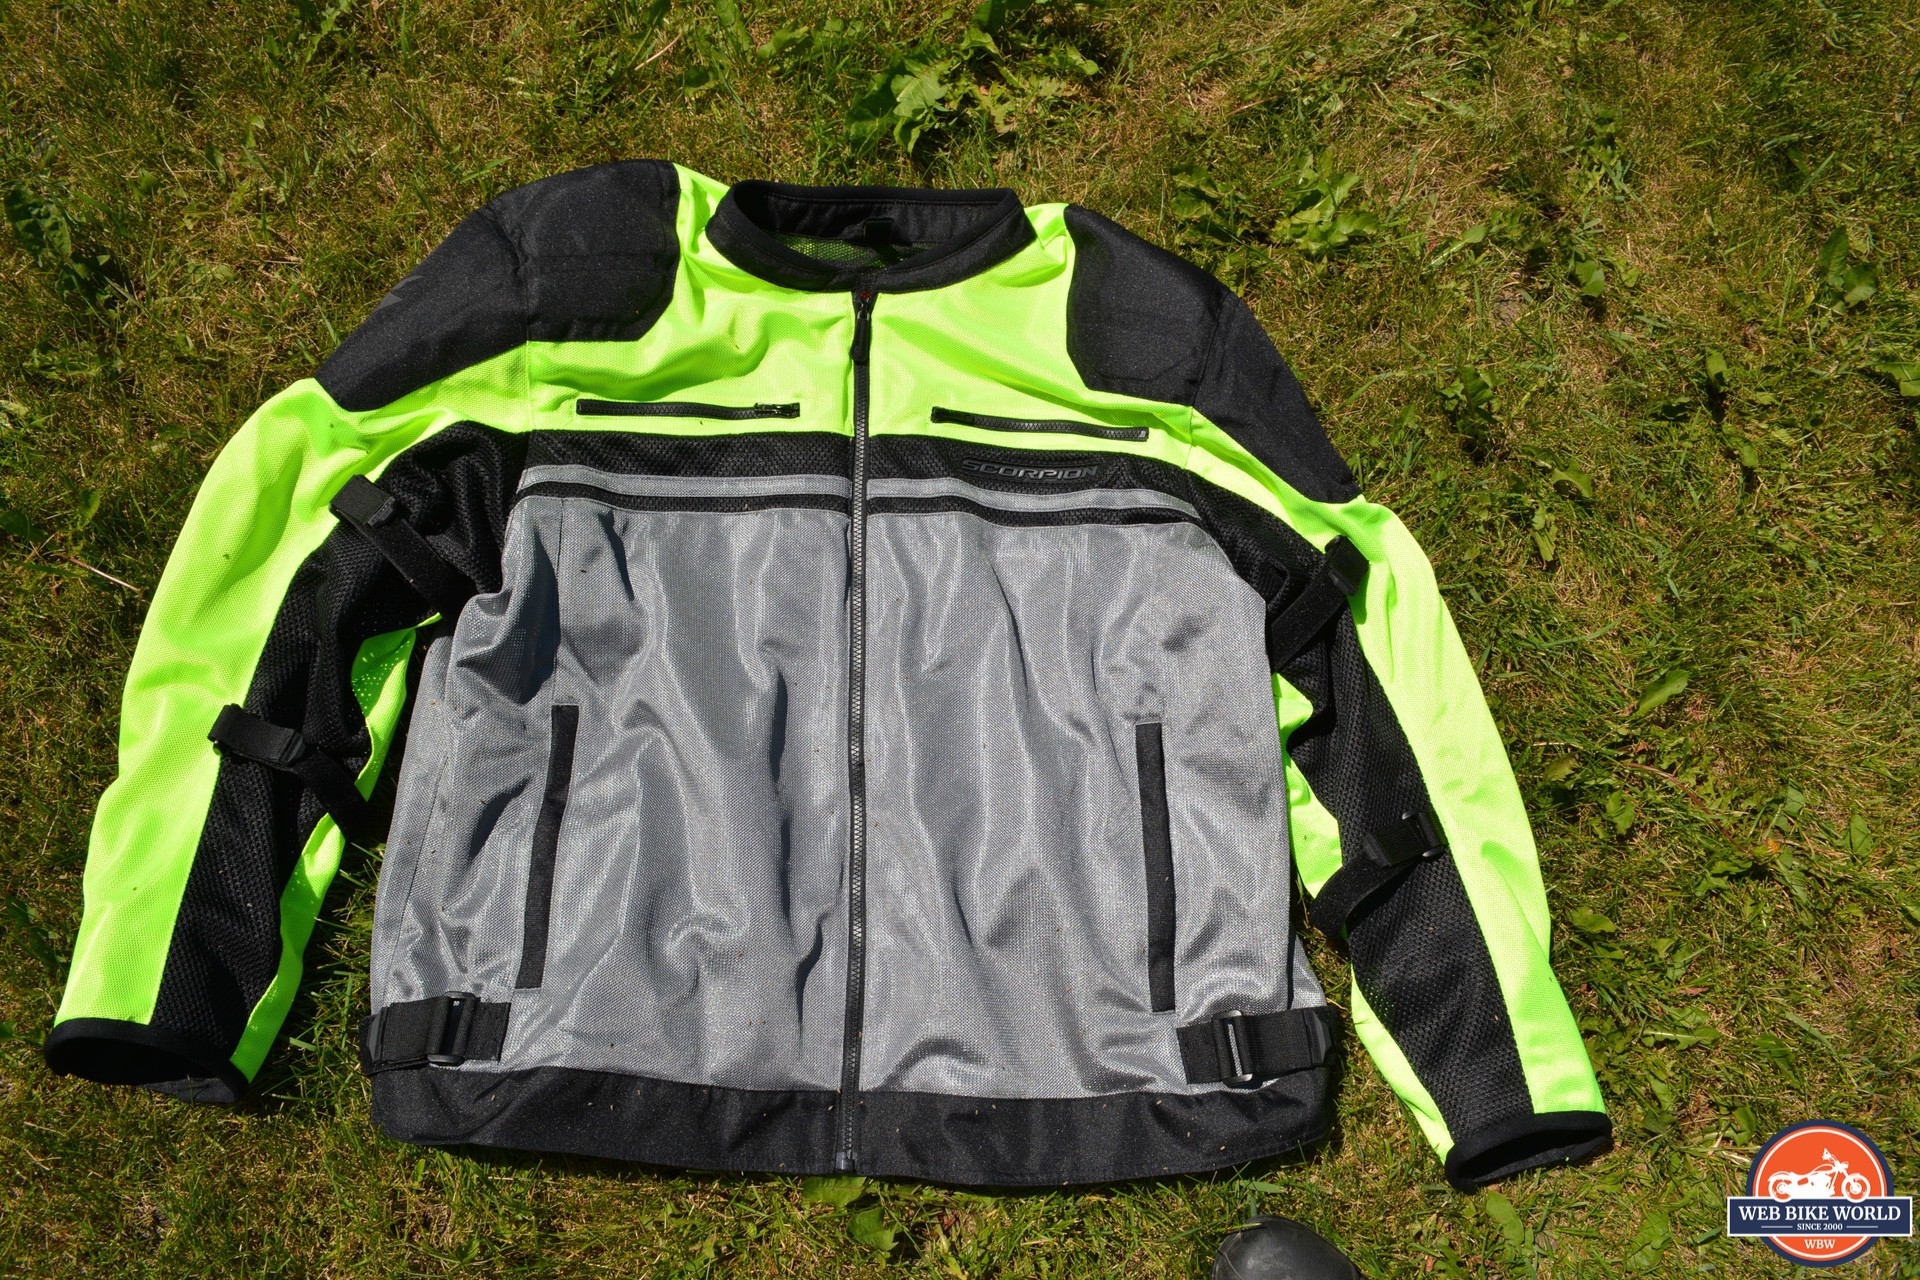 Scorpion Vortex Air Jacket lying front-side-up on grass